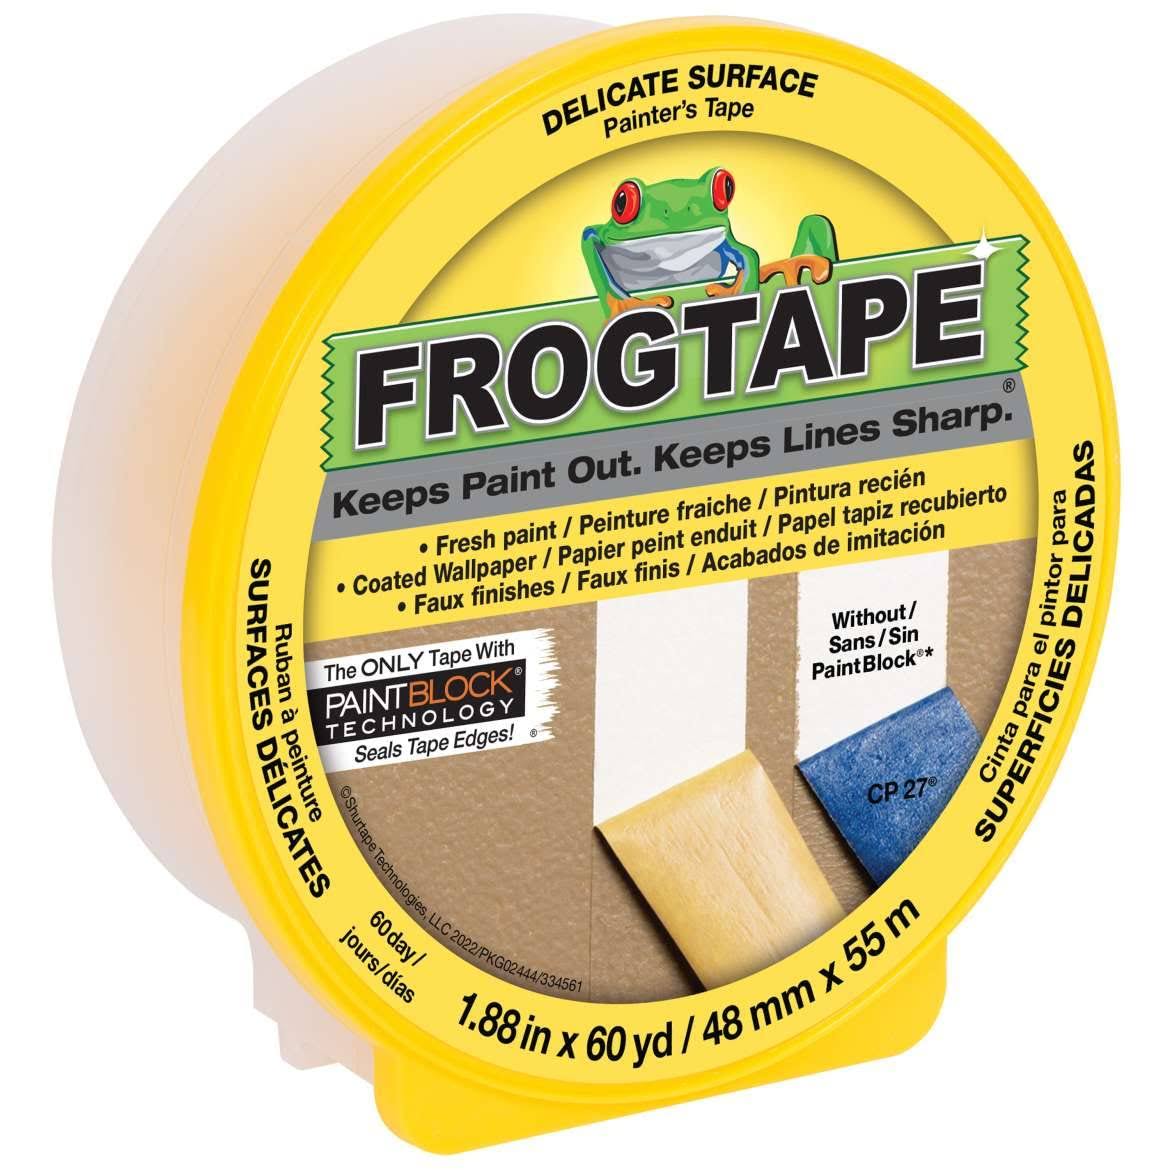 FrogTape 280222 Delicate Surface Painting Tape, Yellow, 1.88-Inch x 60-Yard Roll